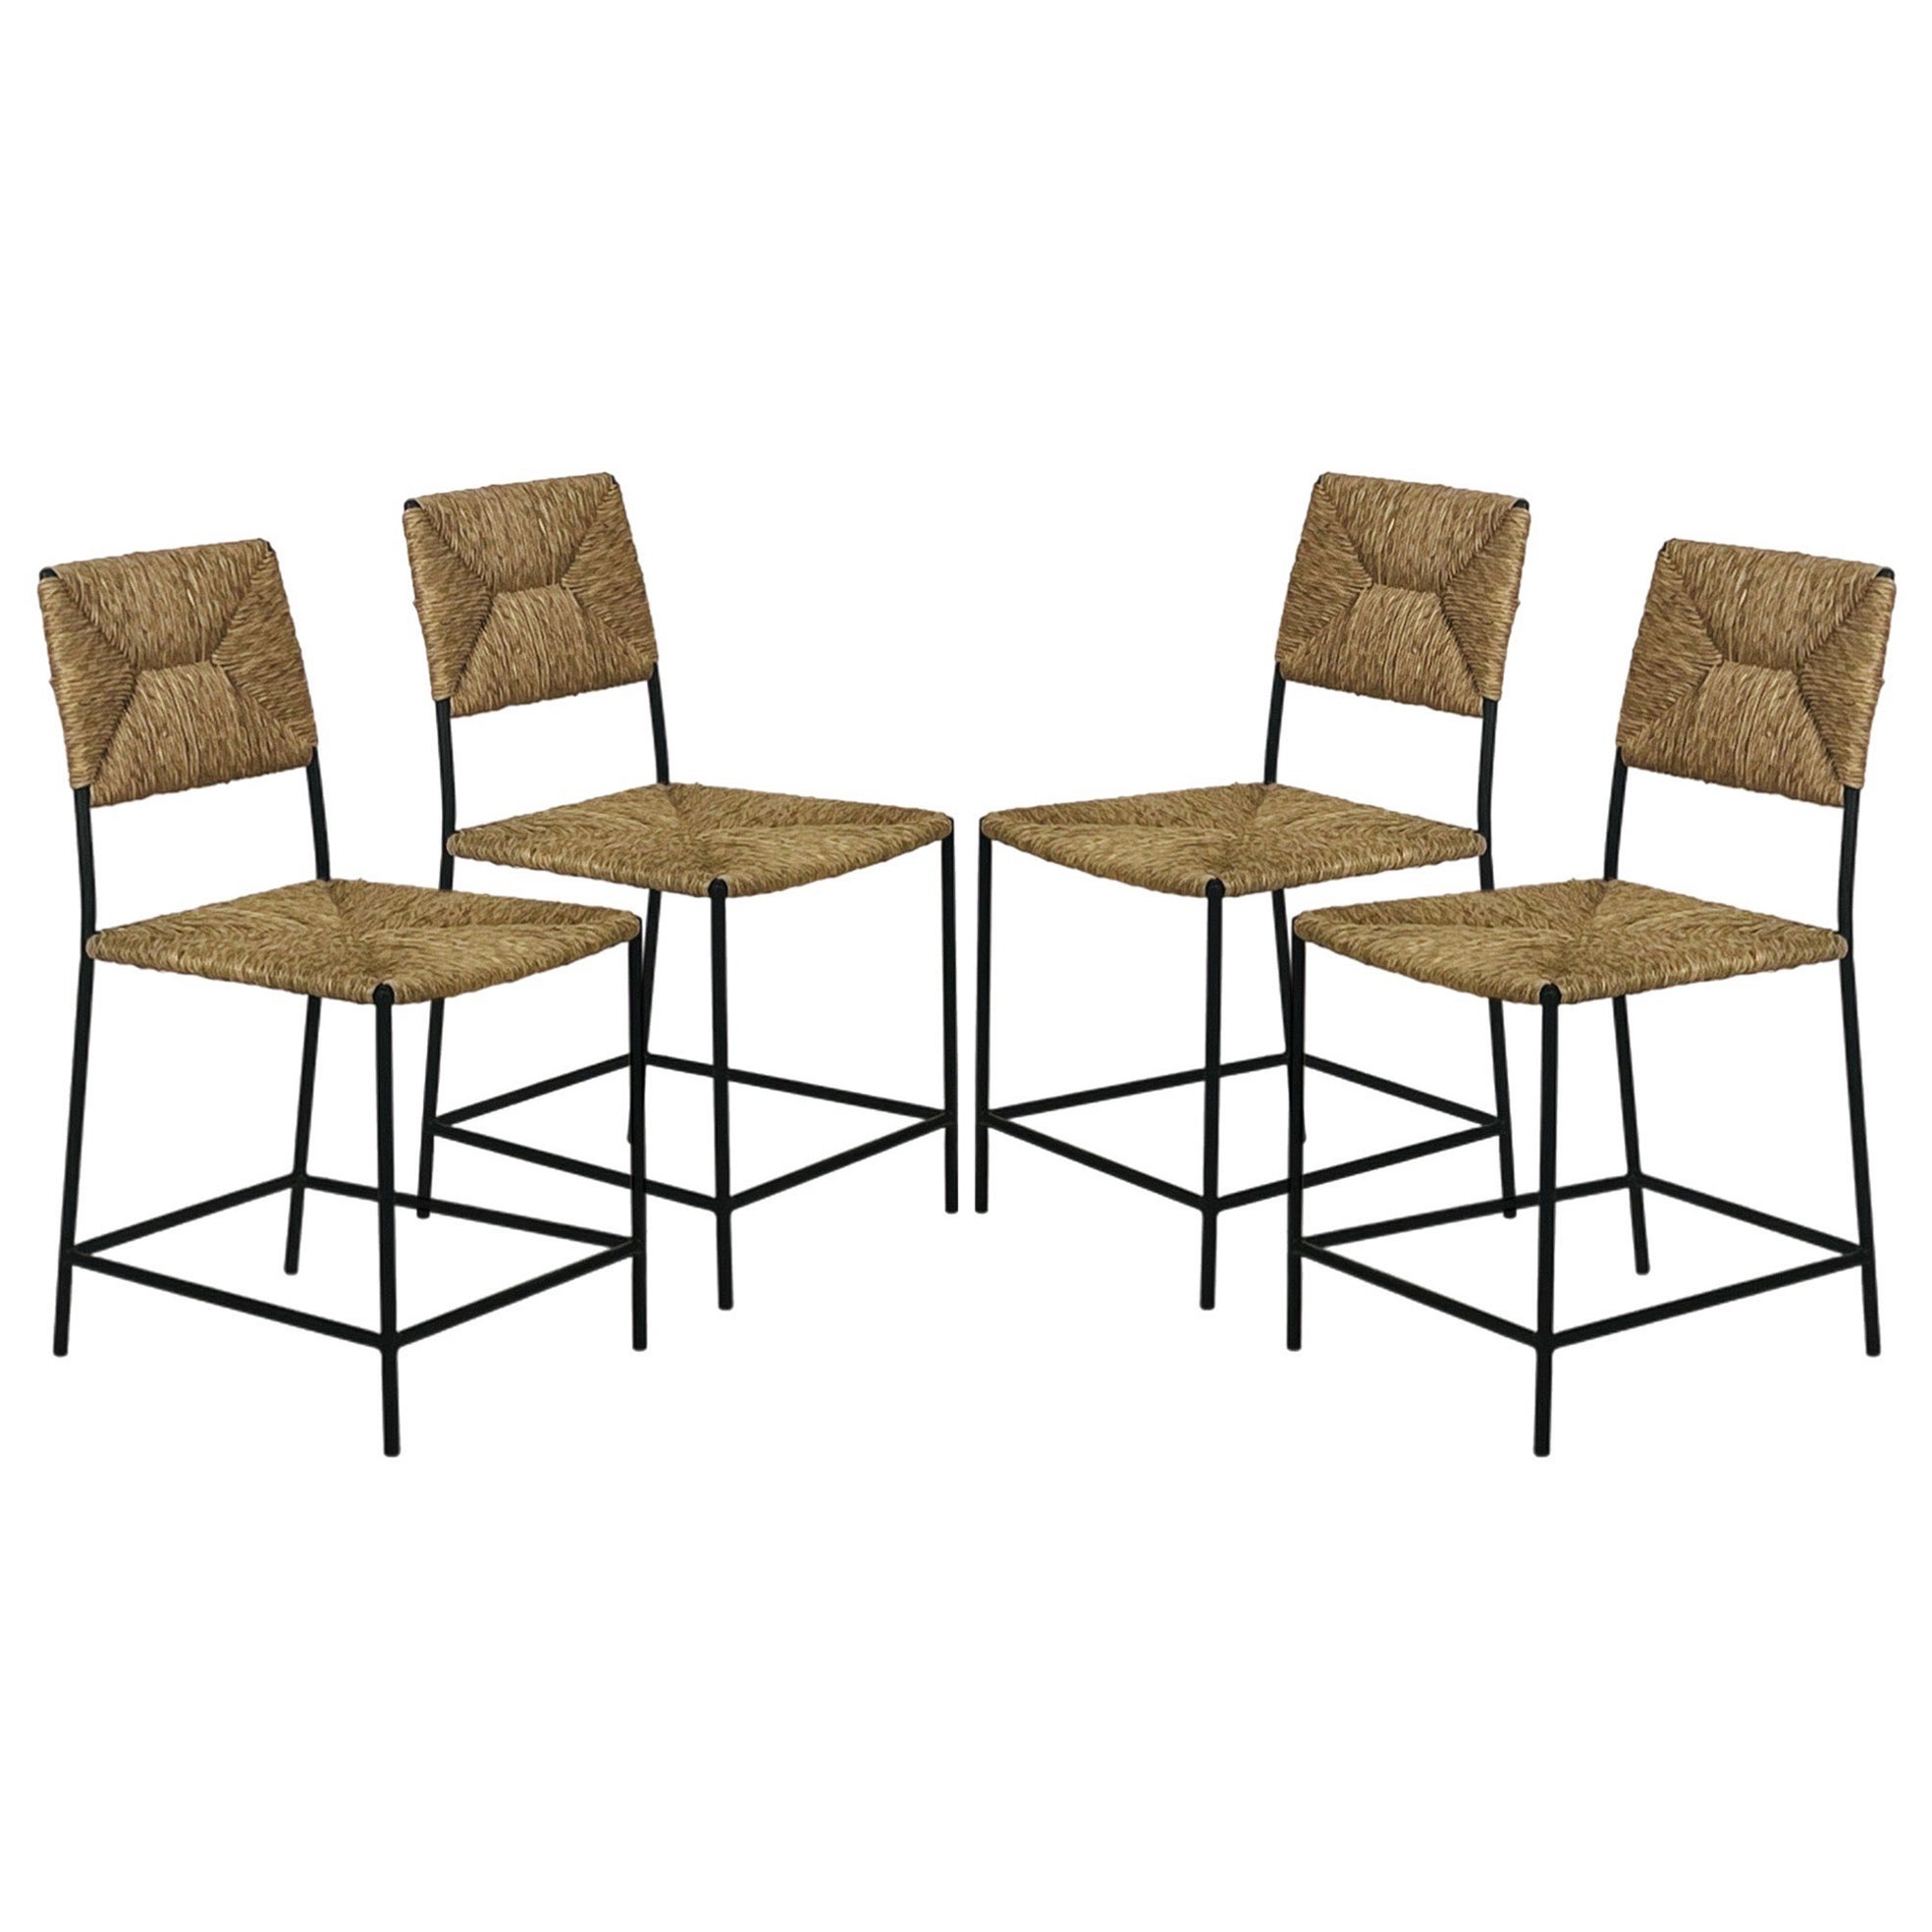 Set of 4 'Campagne' Dining Chairs by Design Frères For Sale